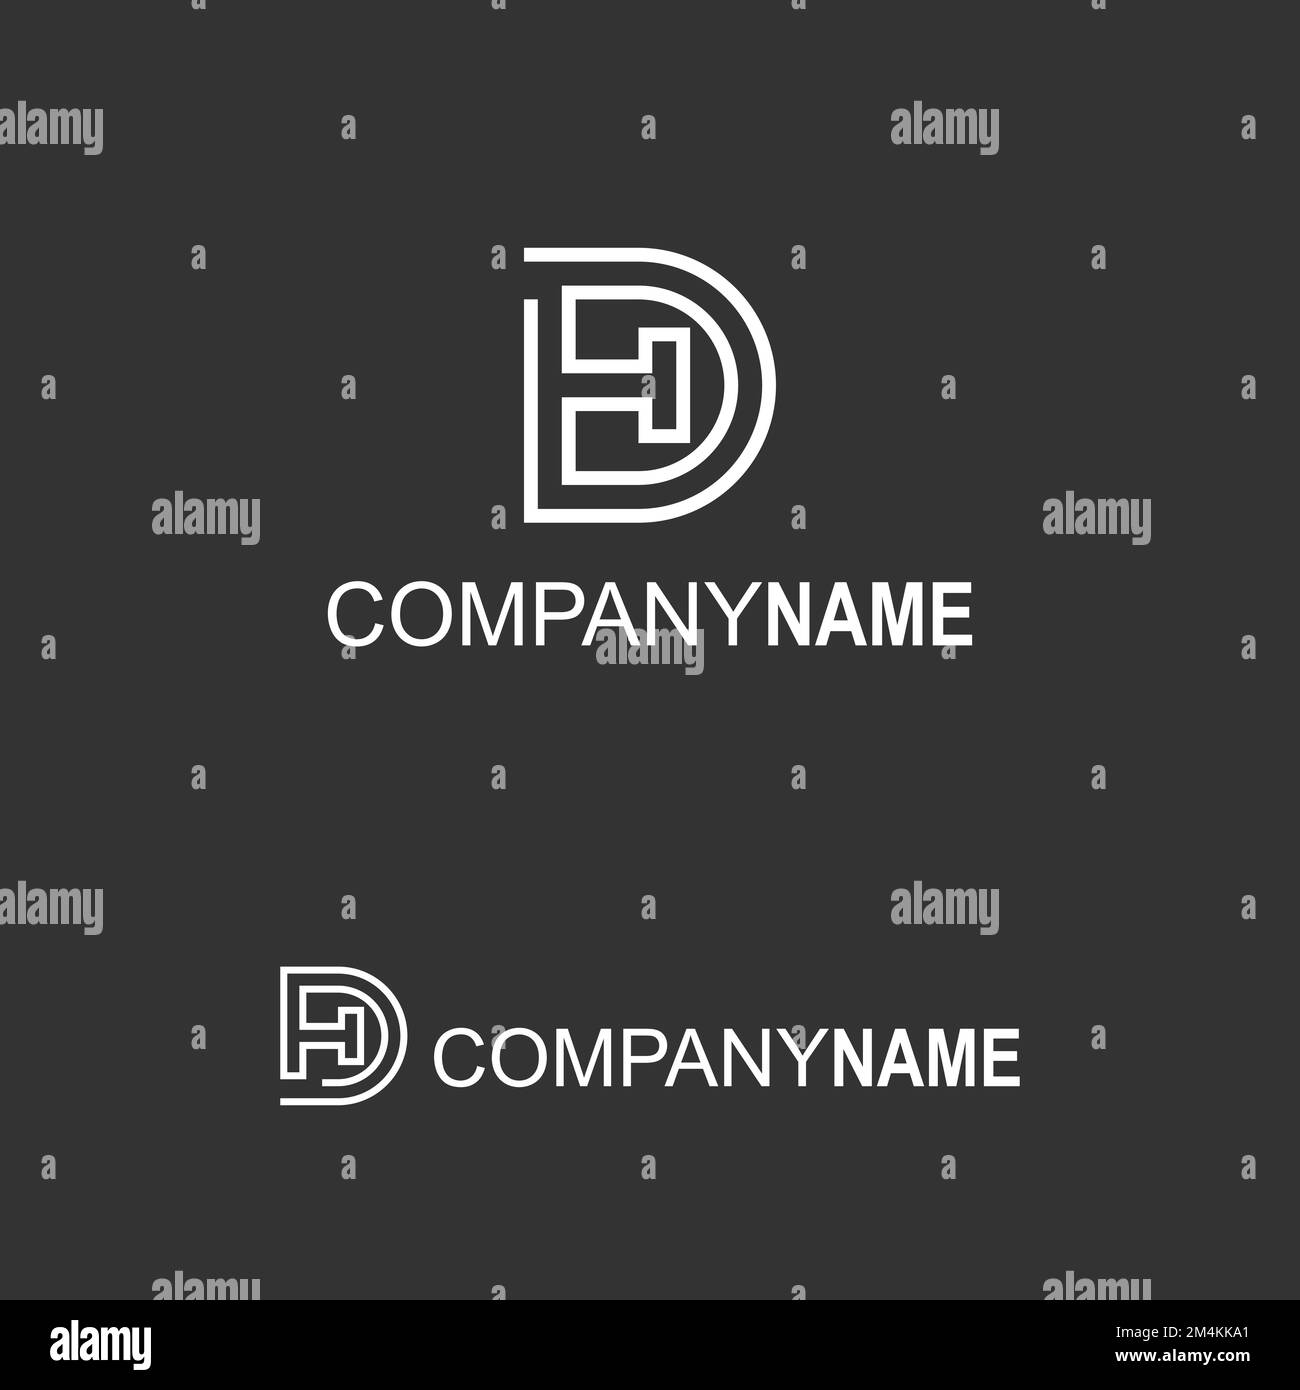 Amazing letter HD font in double line out Image graphic icon logo design abstract concept vector stock. symbol associated with initial or monogram. Stock Vector